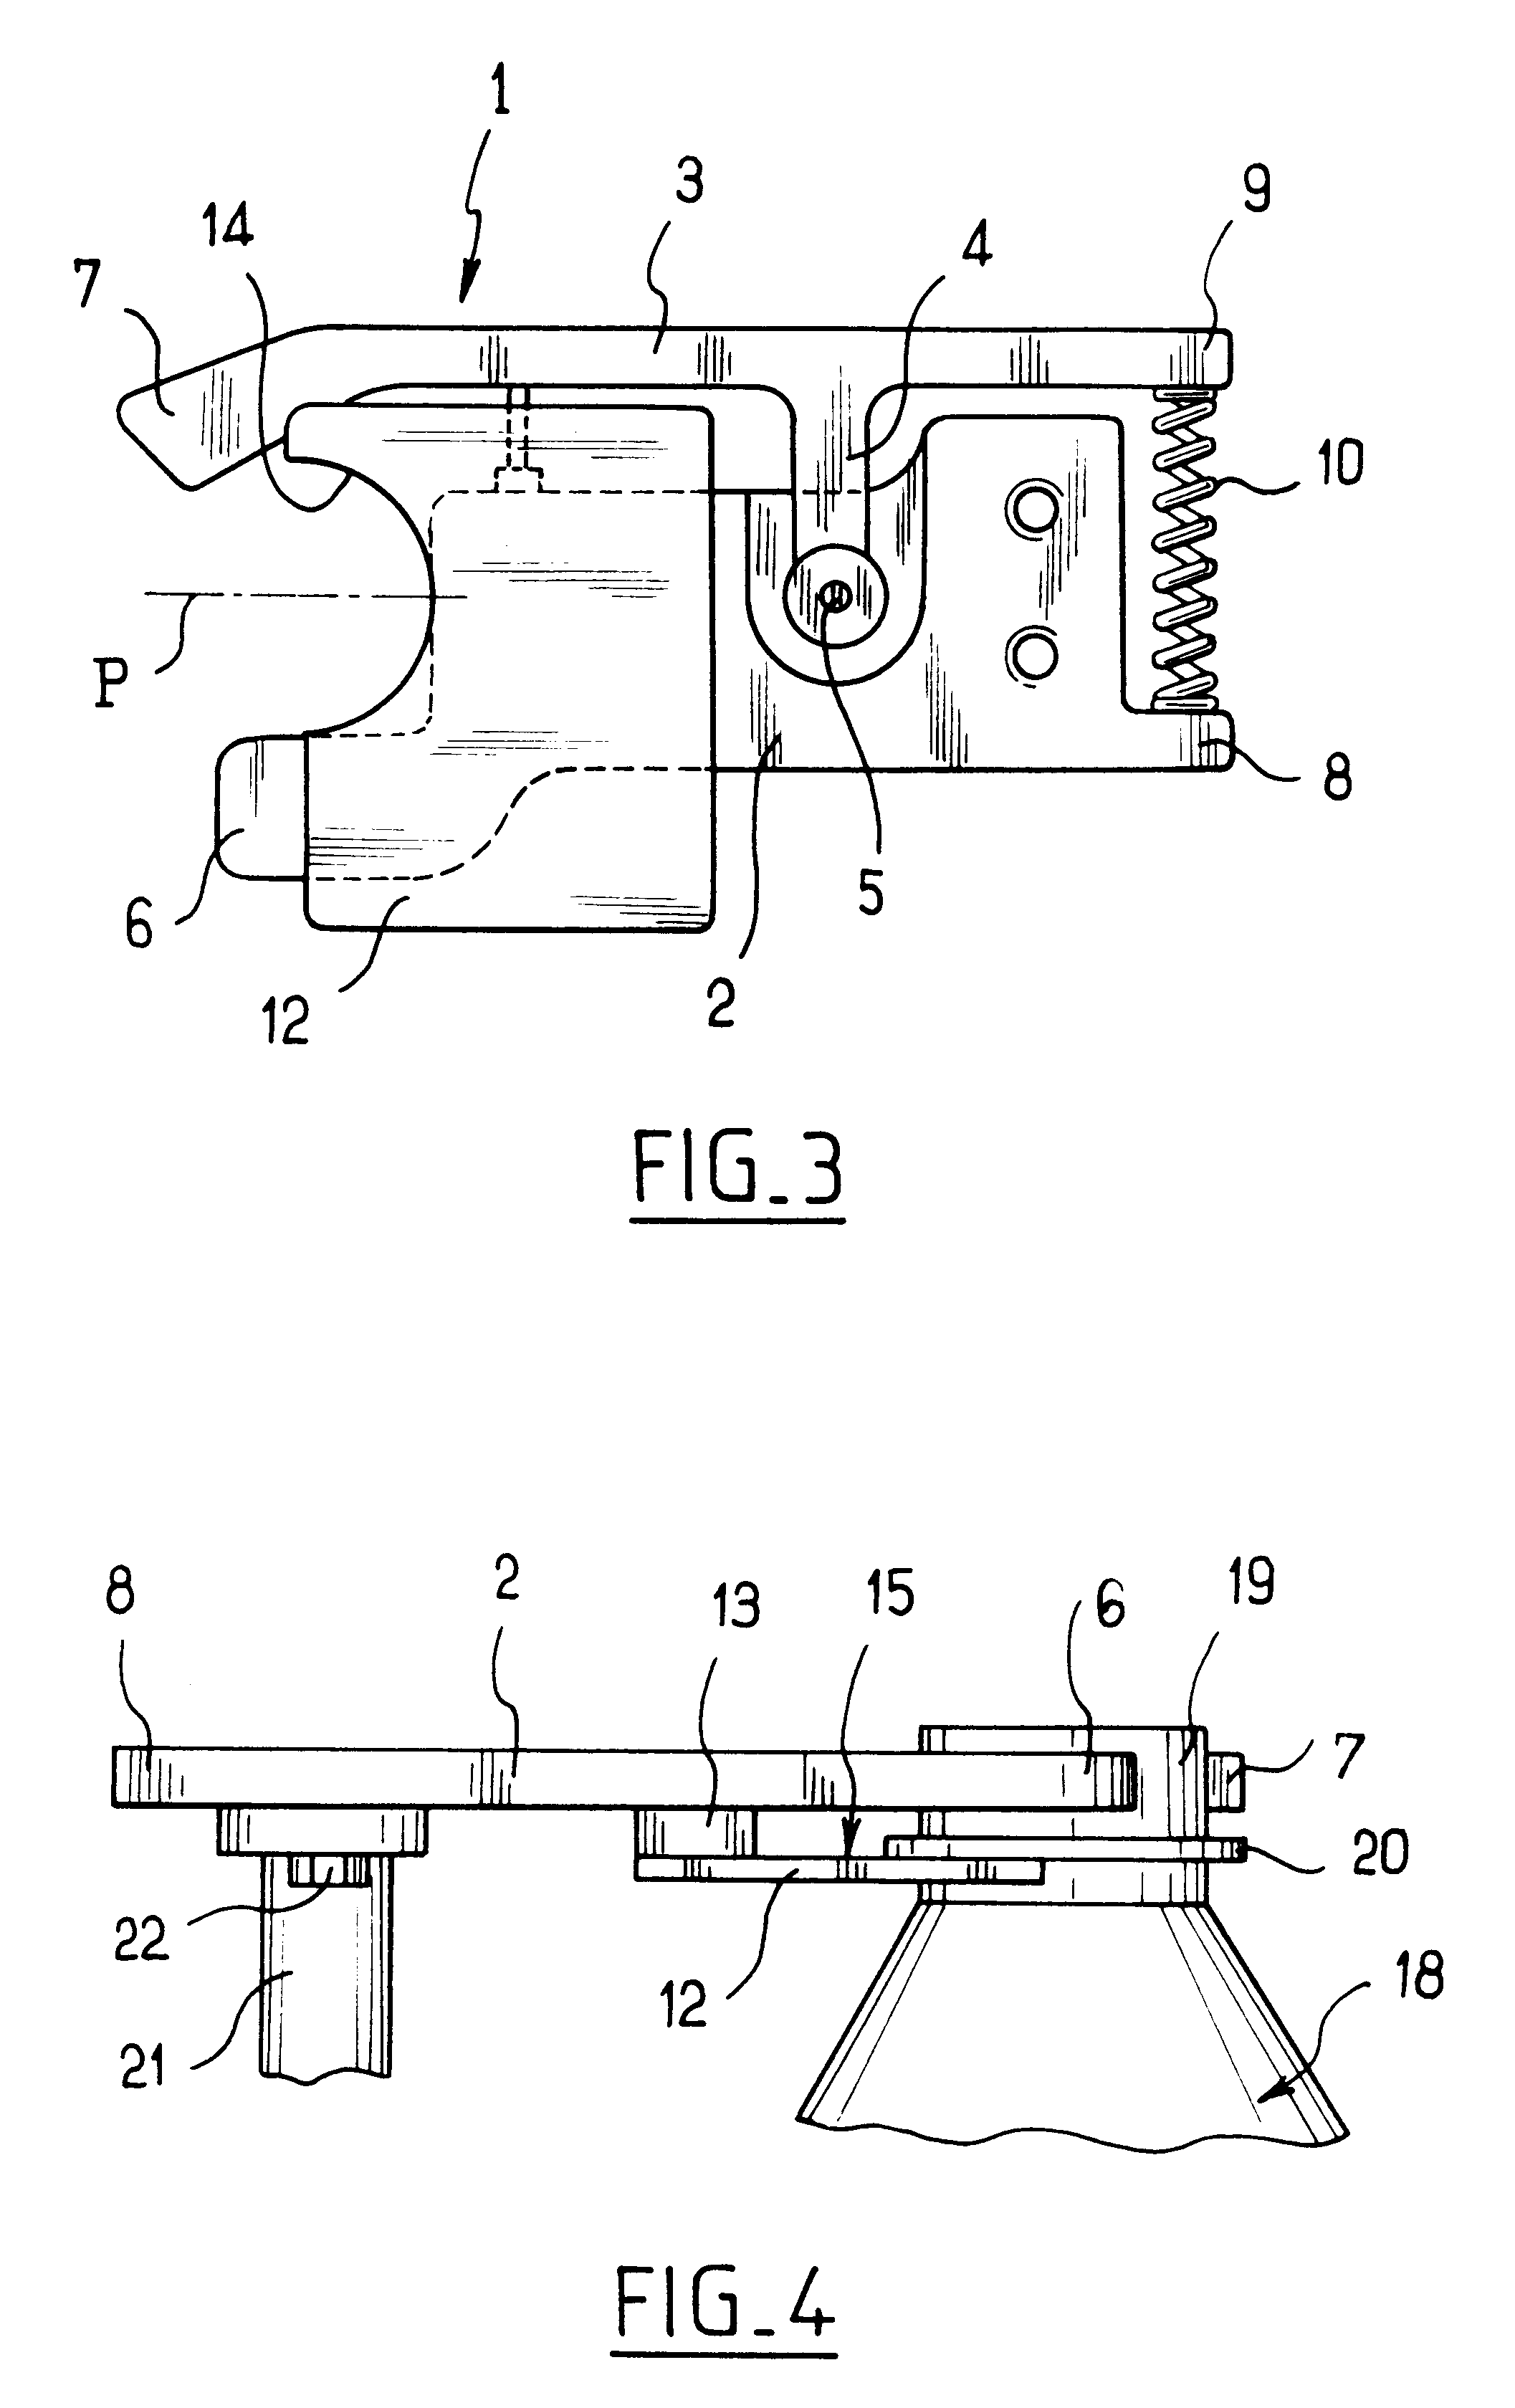 Device for supporting a receptacle in a cantilevered-out position